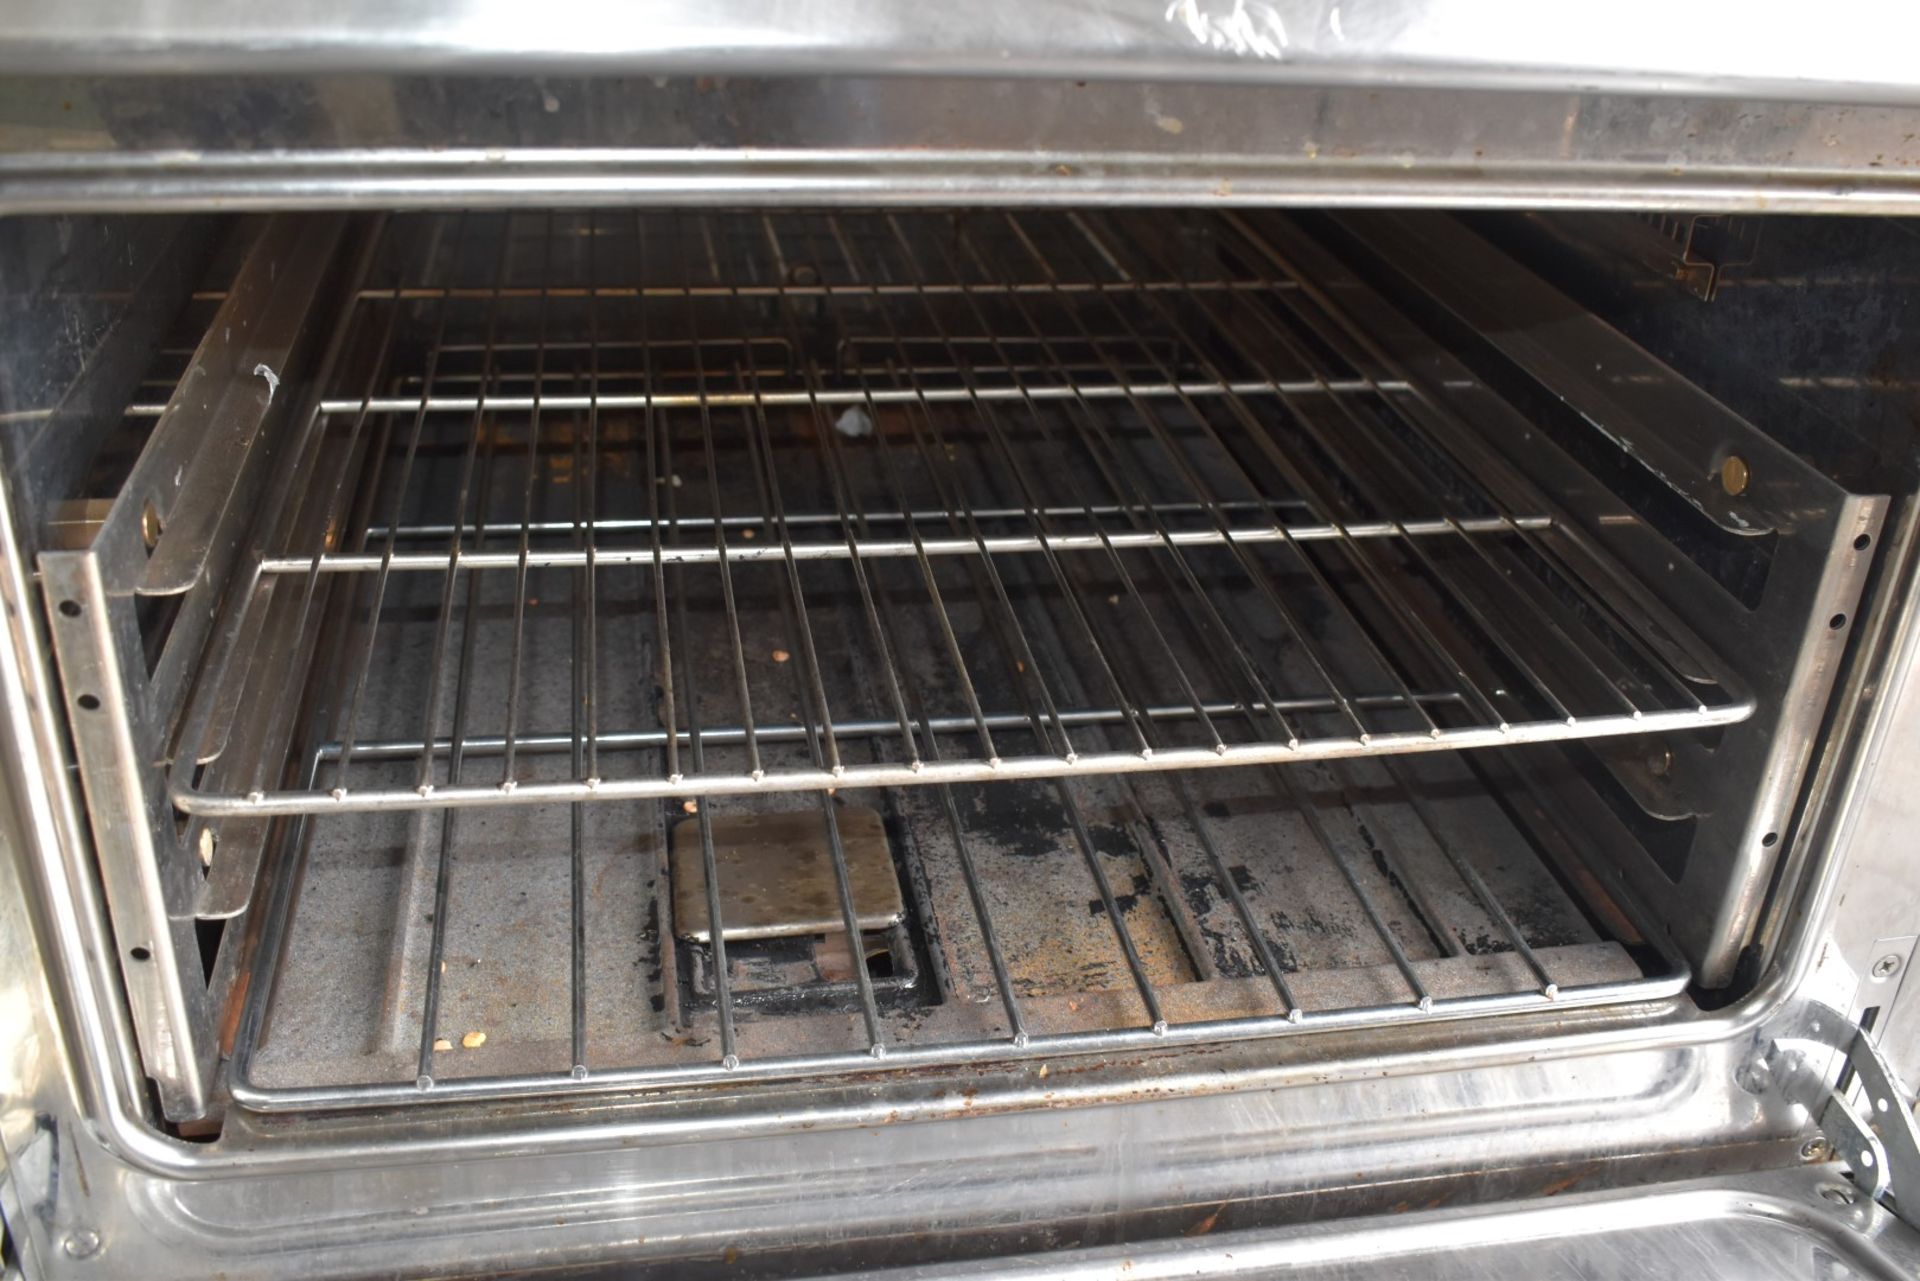 1 x Zanussi 6 Burner Gas Range Cooker with a Stainless Steel Exterior - Image 2 of 18